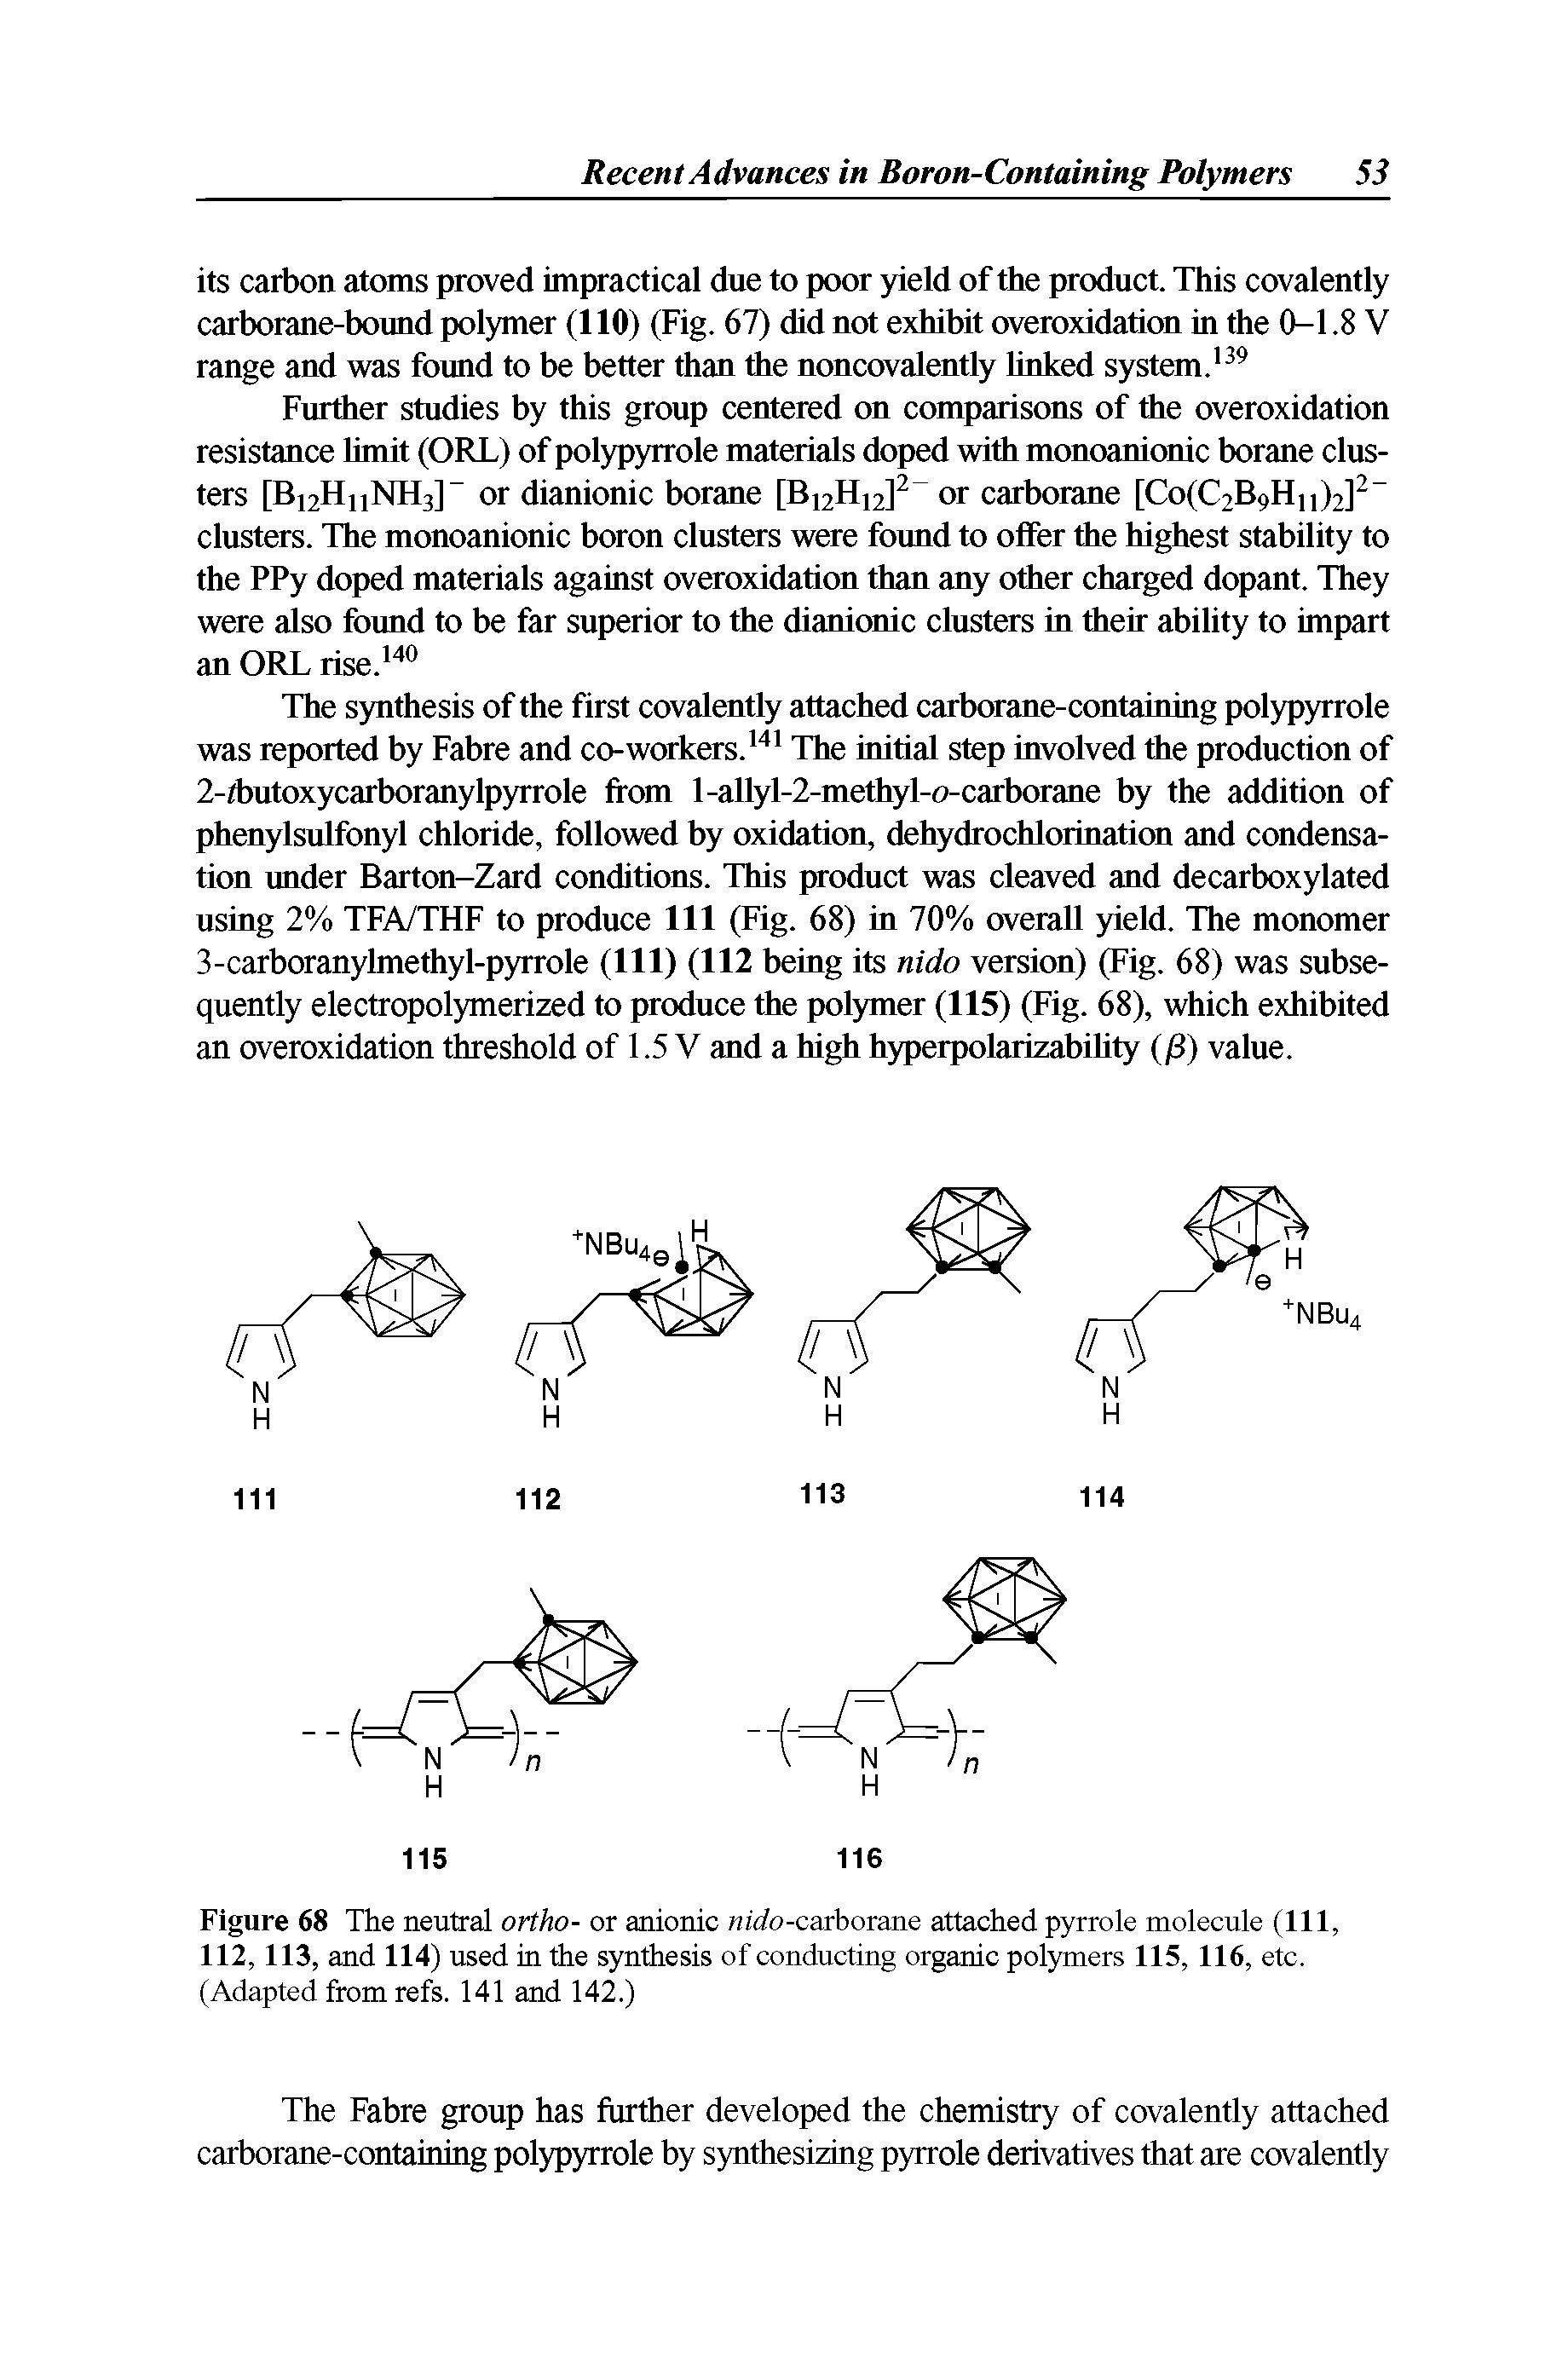 Figure 68 The neutral ortho- or anionic nido-carborane attached pyrrole molecule (111, 112,113, and 114) used in the synthesis of conducting organic polymers 115, 116, etc. (Adapted from refs. 141 and 142.)...